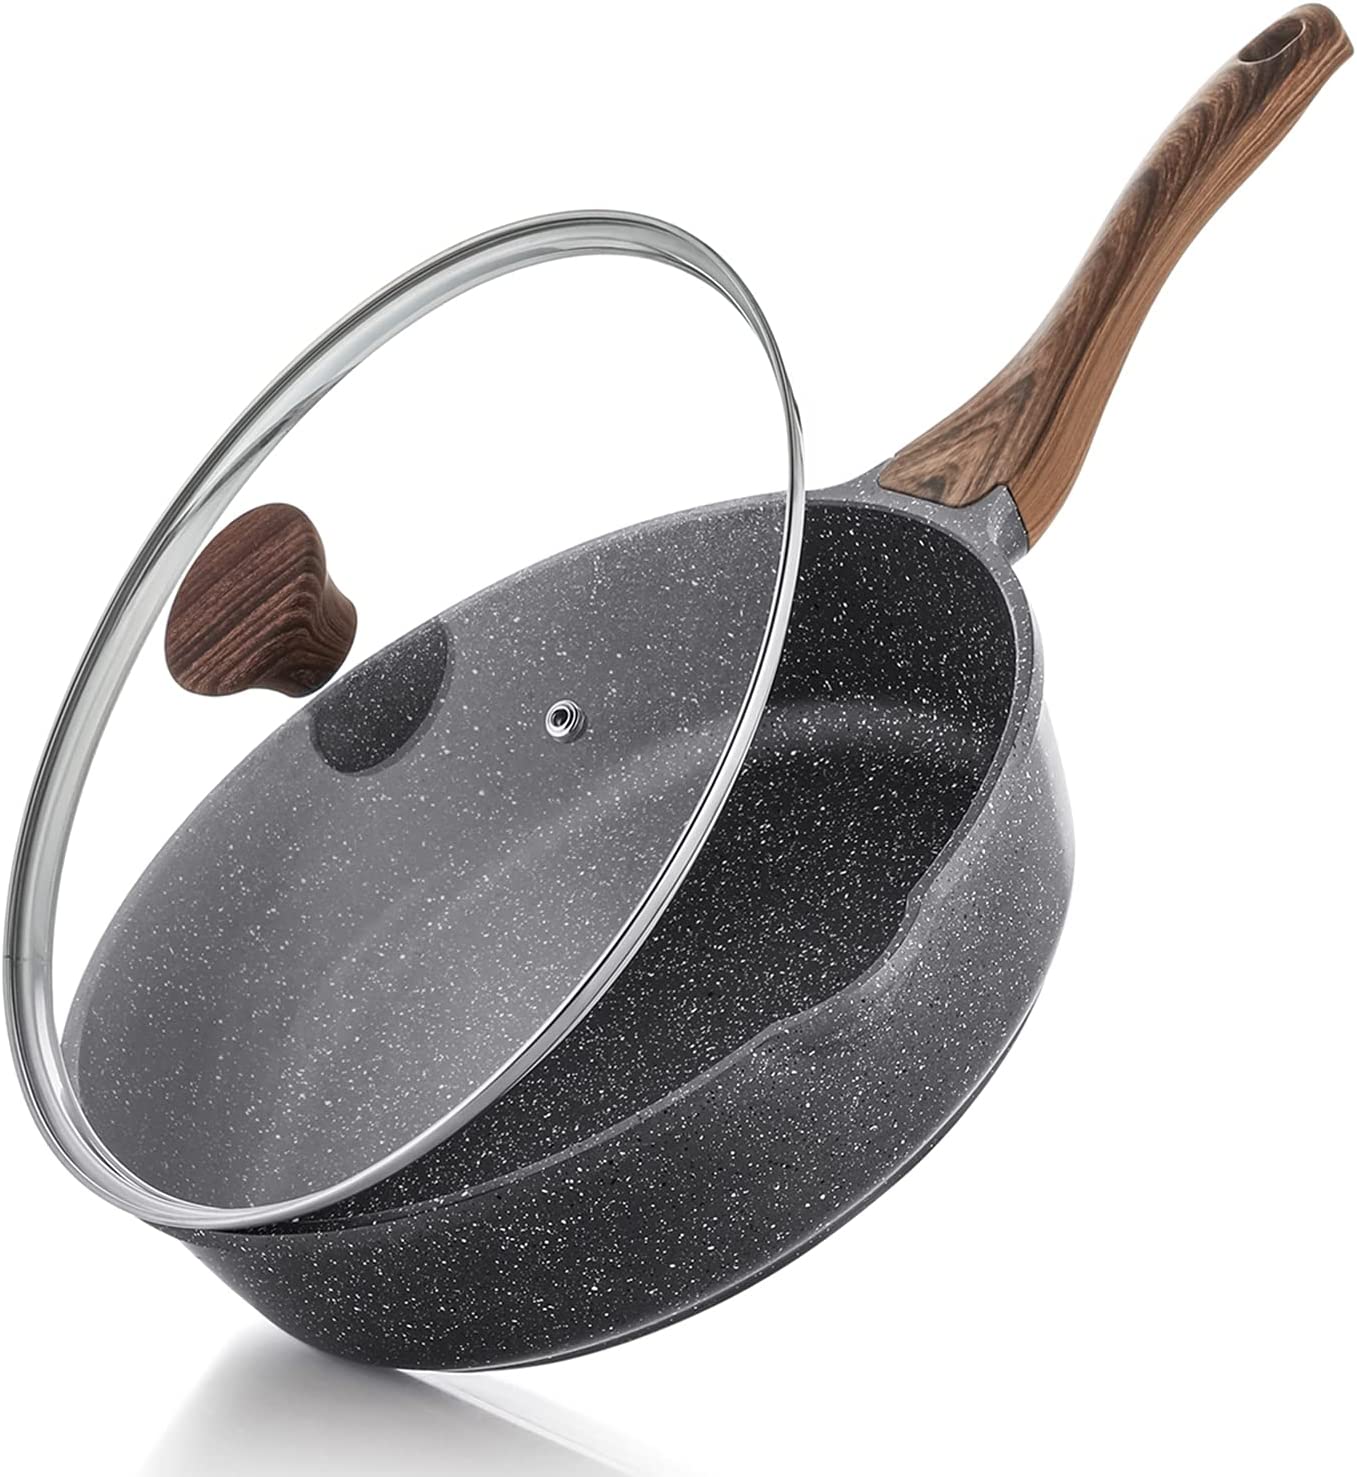 KOCH SYSTEME CS 11 Nonstick Frying Pan-Granite Skillet with Lid, Fry Pan  with APEO and PFOA-Free Stone Derived Coating, Aluminum Alloy Pan, Oven  Safe